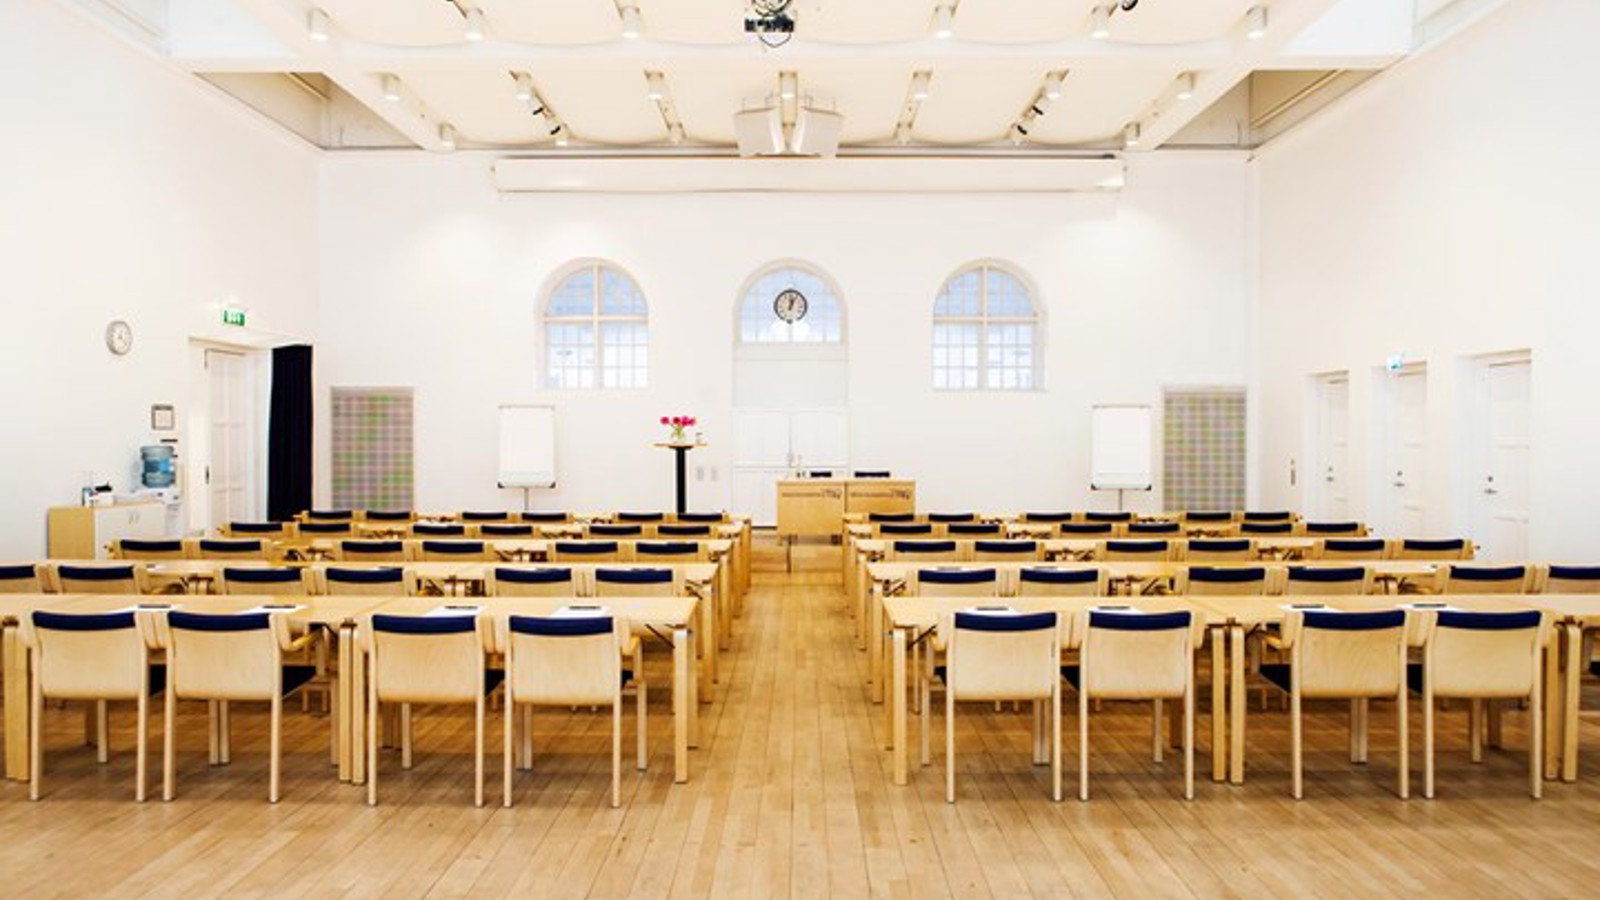 Conference with cinema seating, wooden chairs, wooden floor and white walls